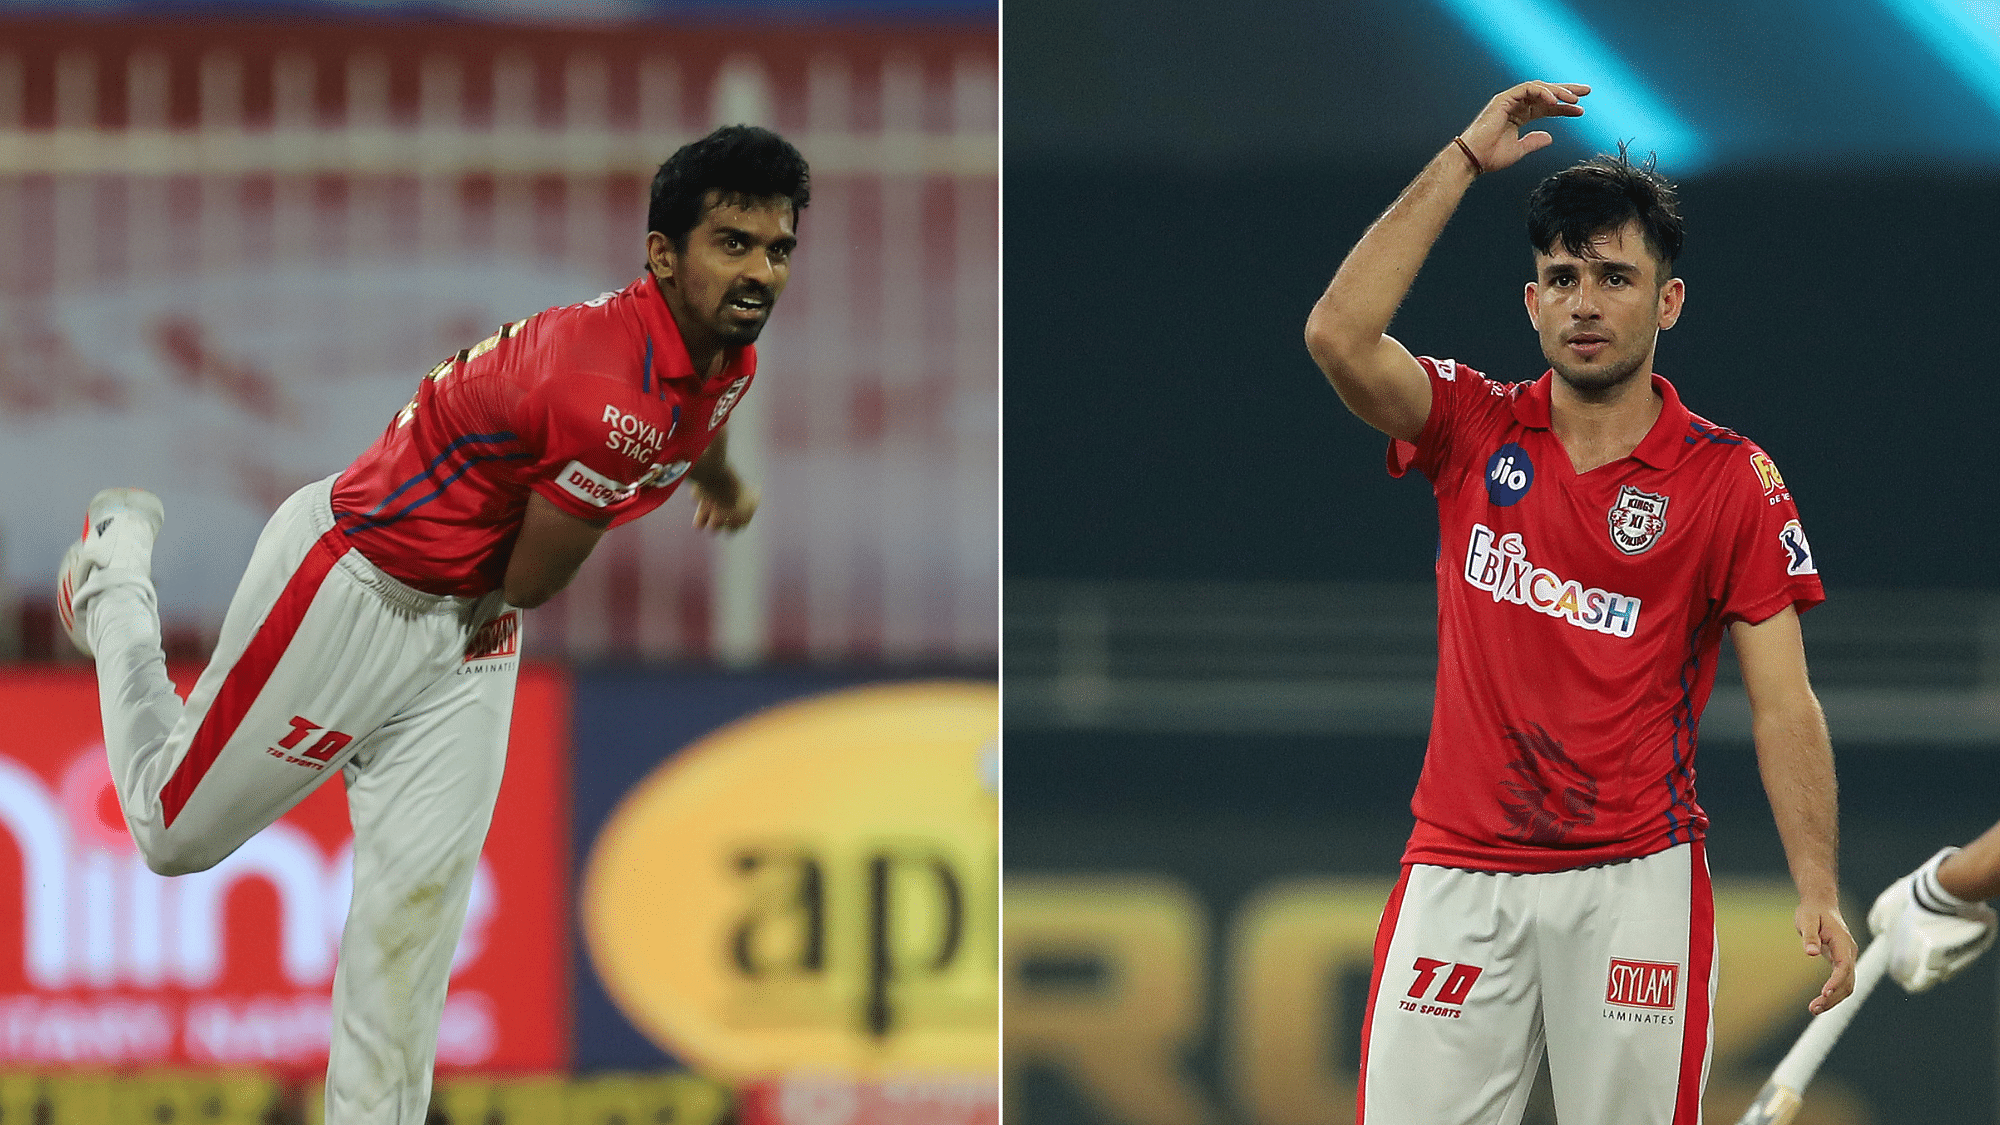 KXIP have found unlikely heroes in their two leg-spinners – Ravi Bishnoi and Murugan Ashwin.